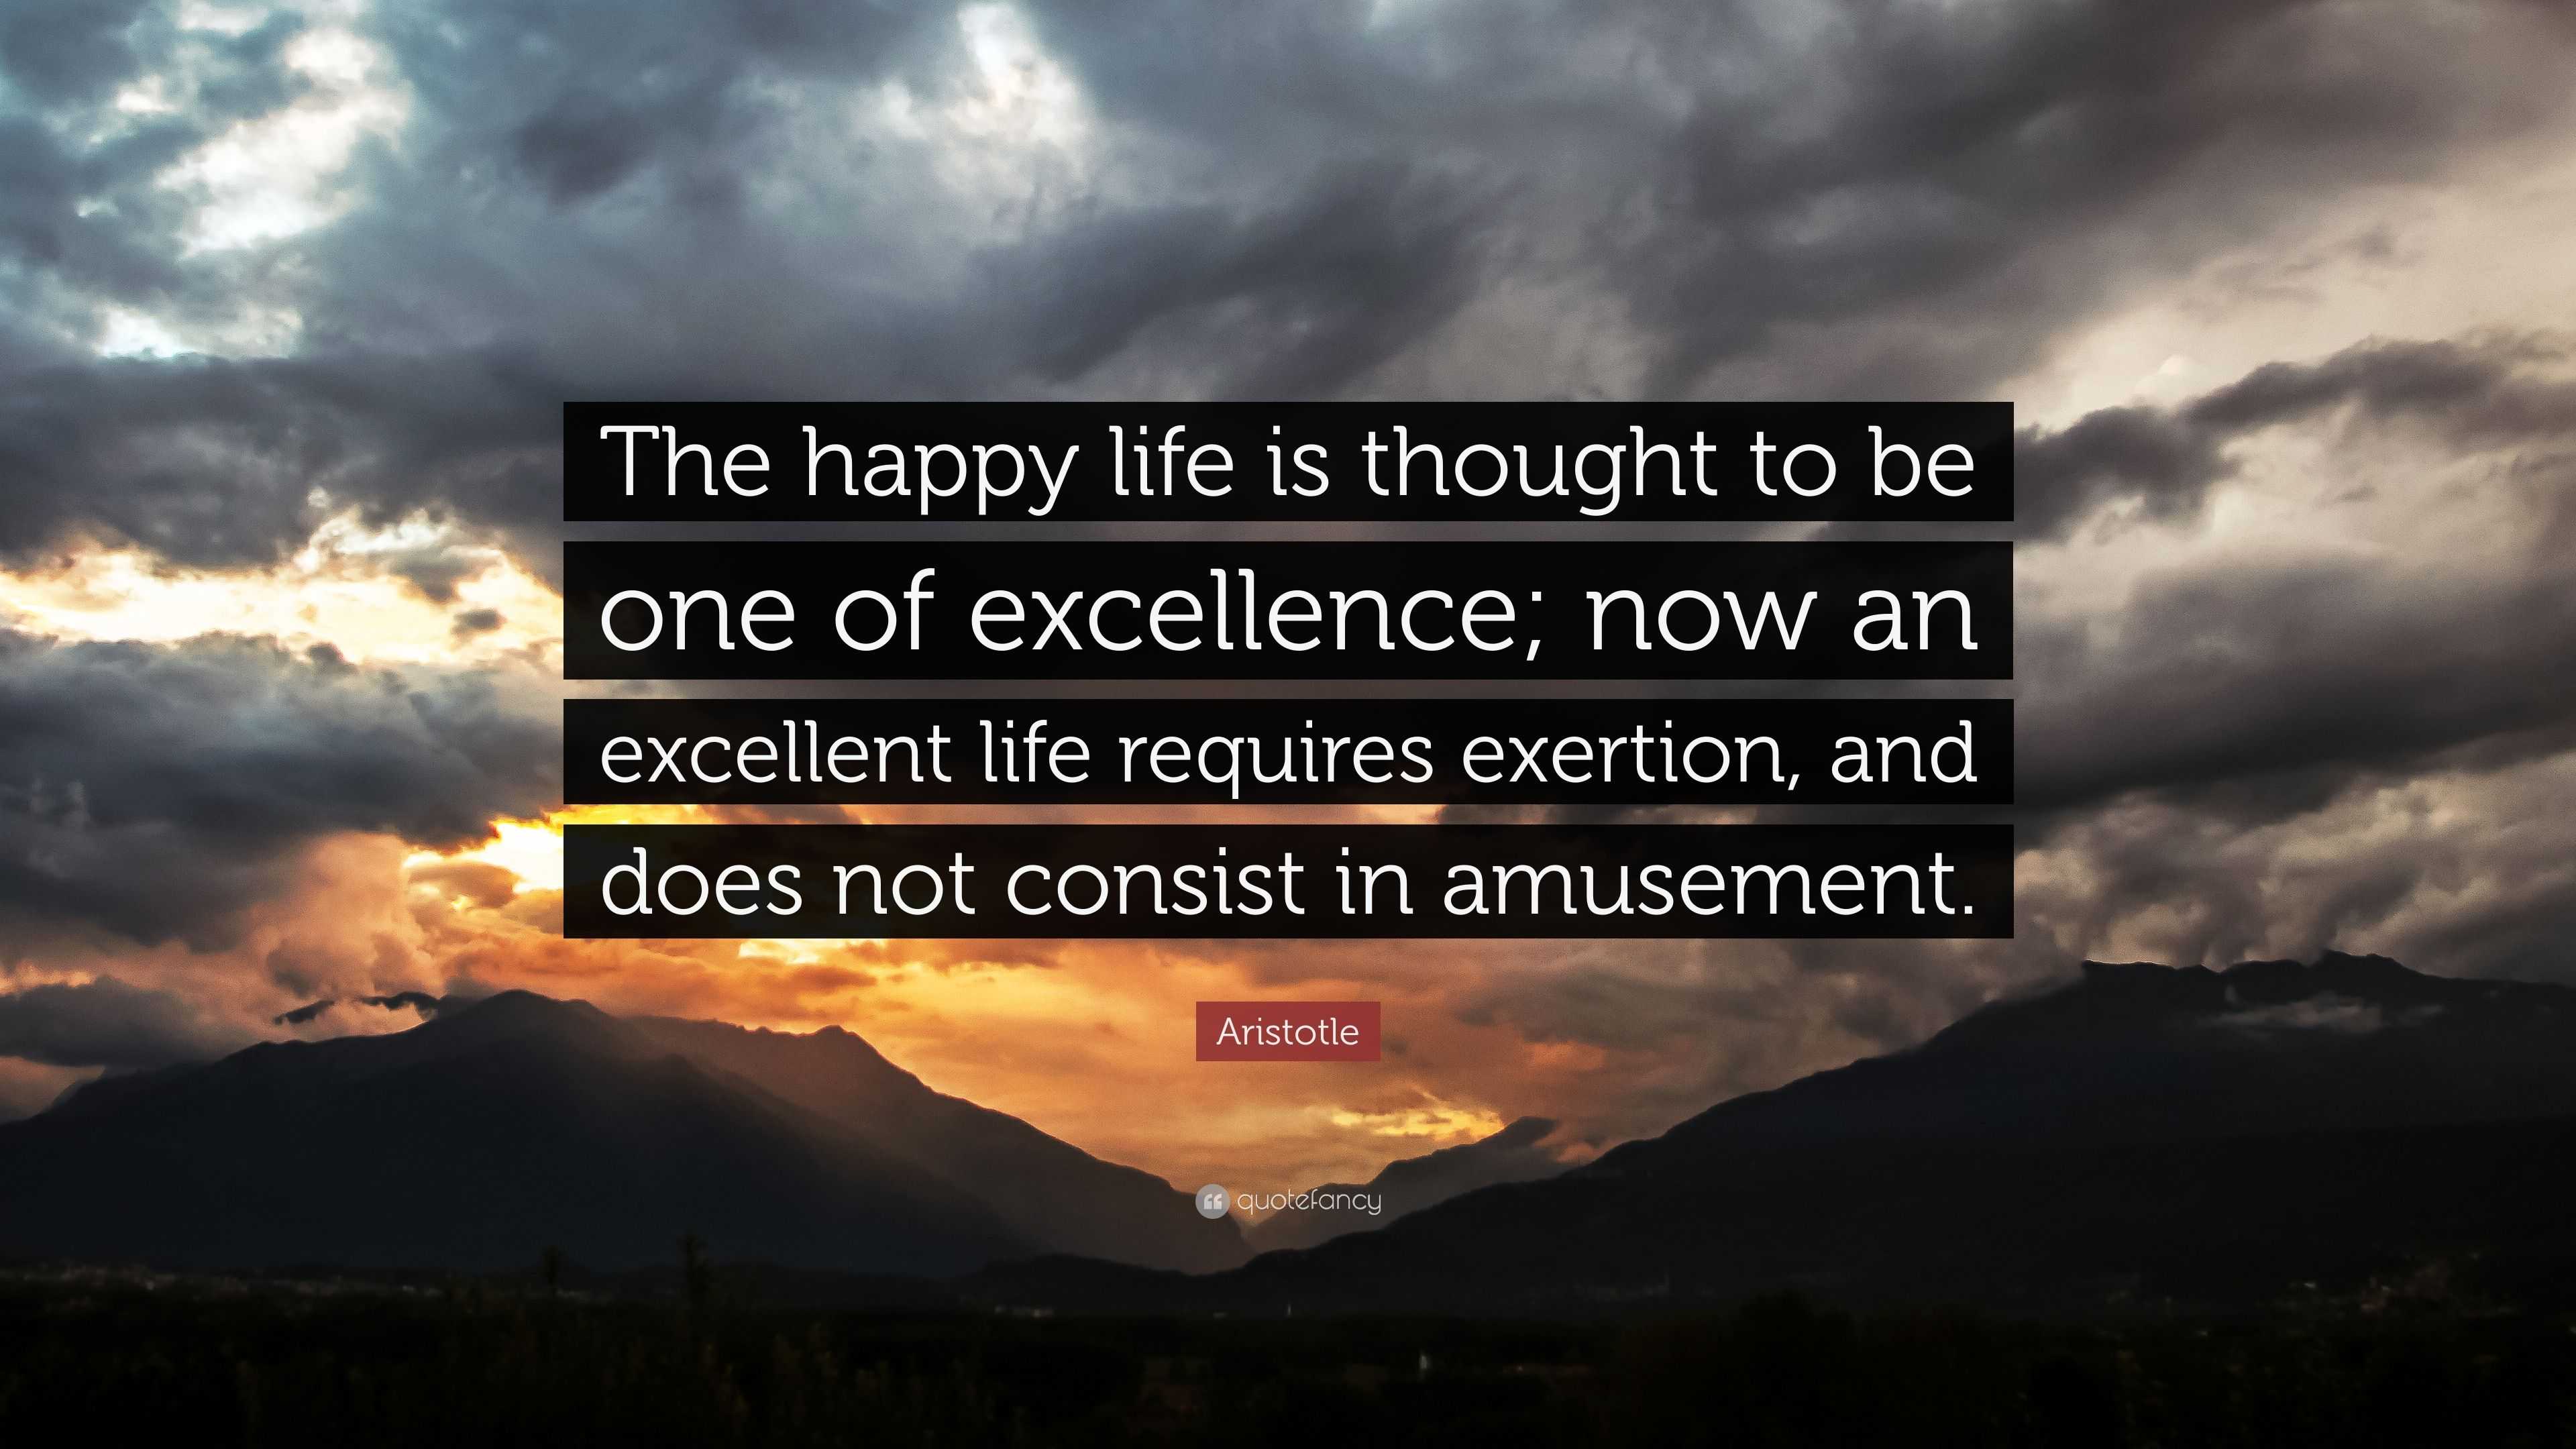 thoughts on happy life